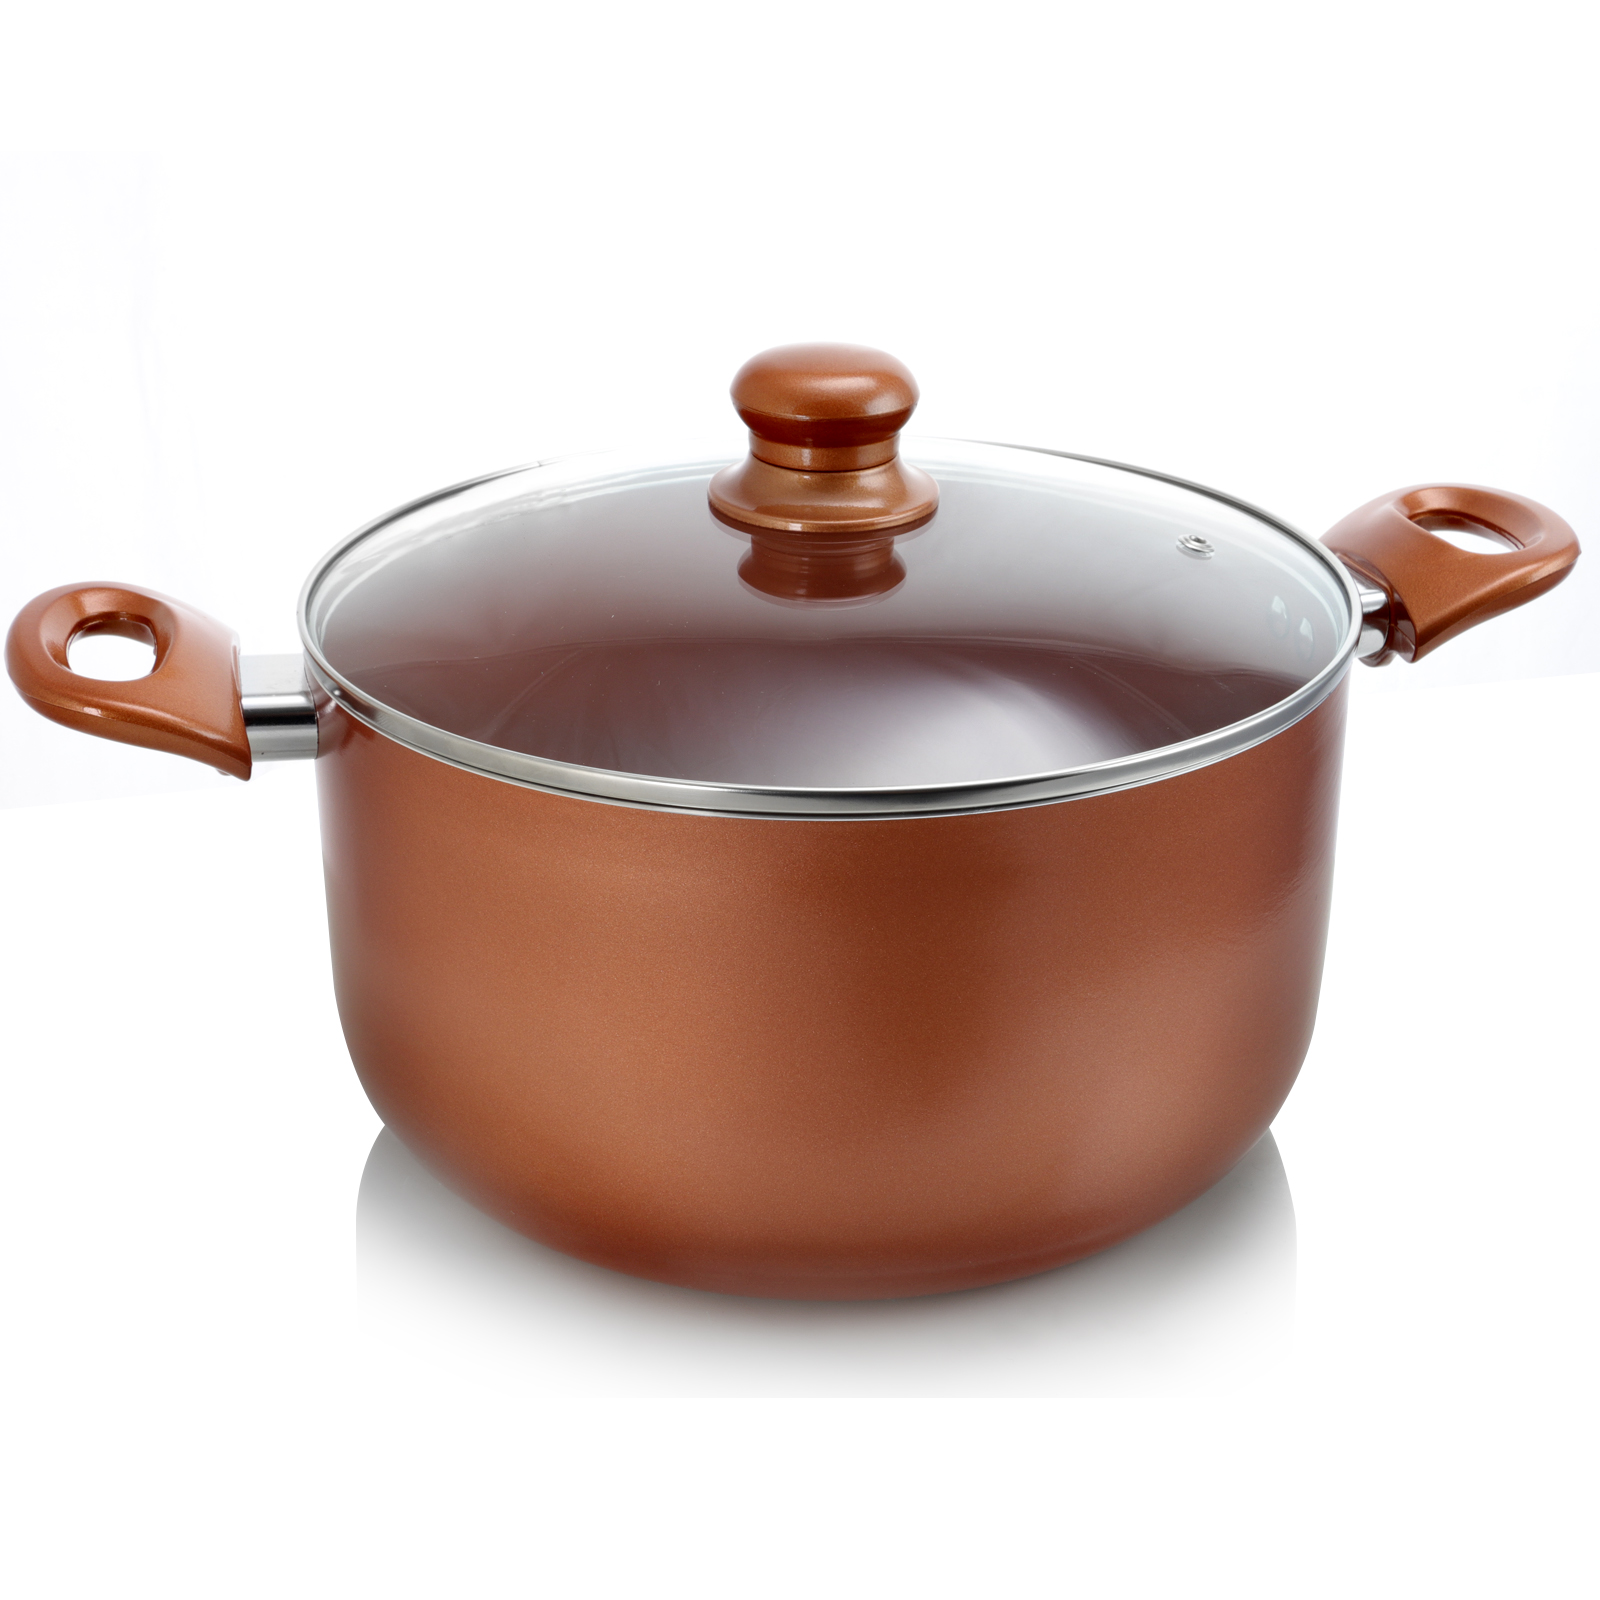 Better Chef  4 Qt. Copper Colored Ceramic Coated Dutchoven with glass lid